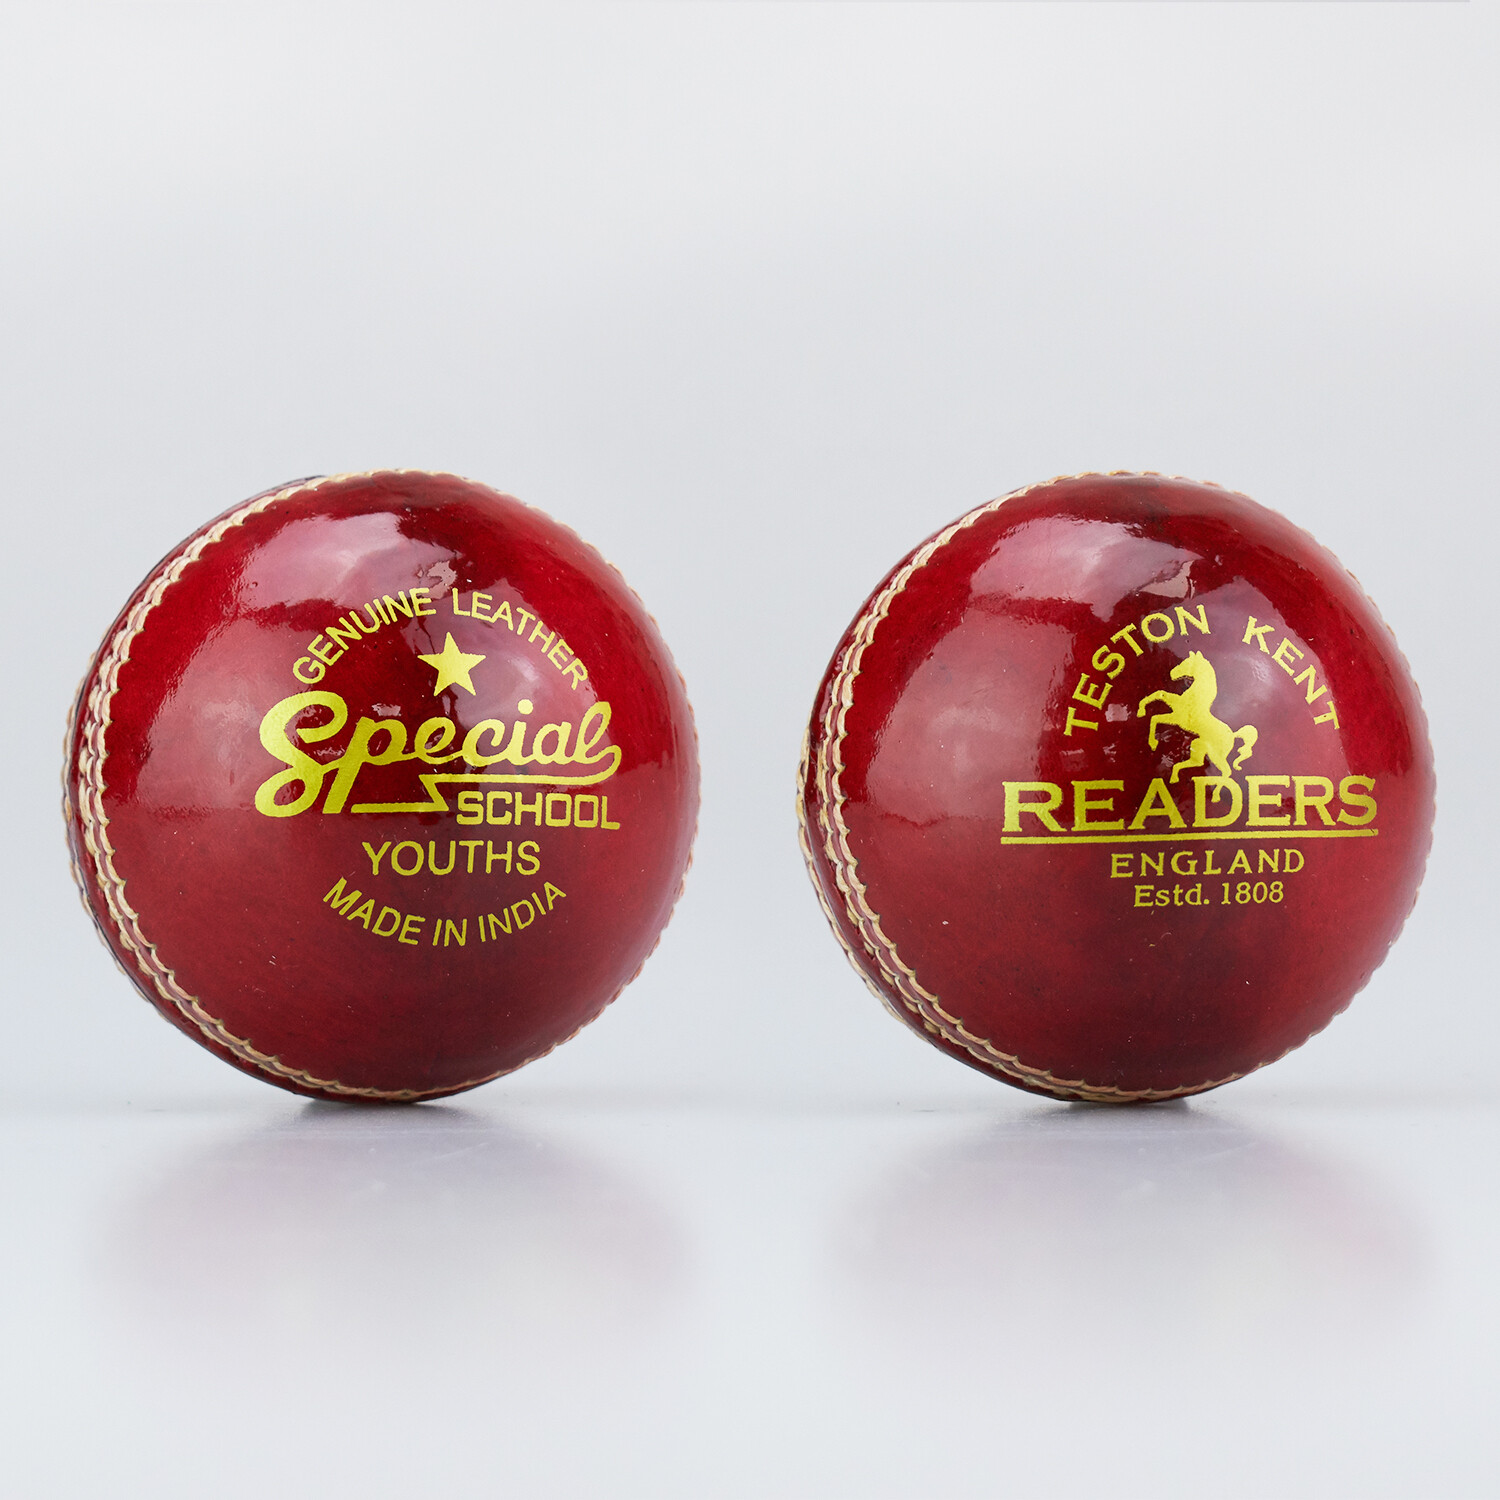 Readers Special School Red Leather Cricket Ball (Youths Only)